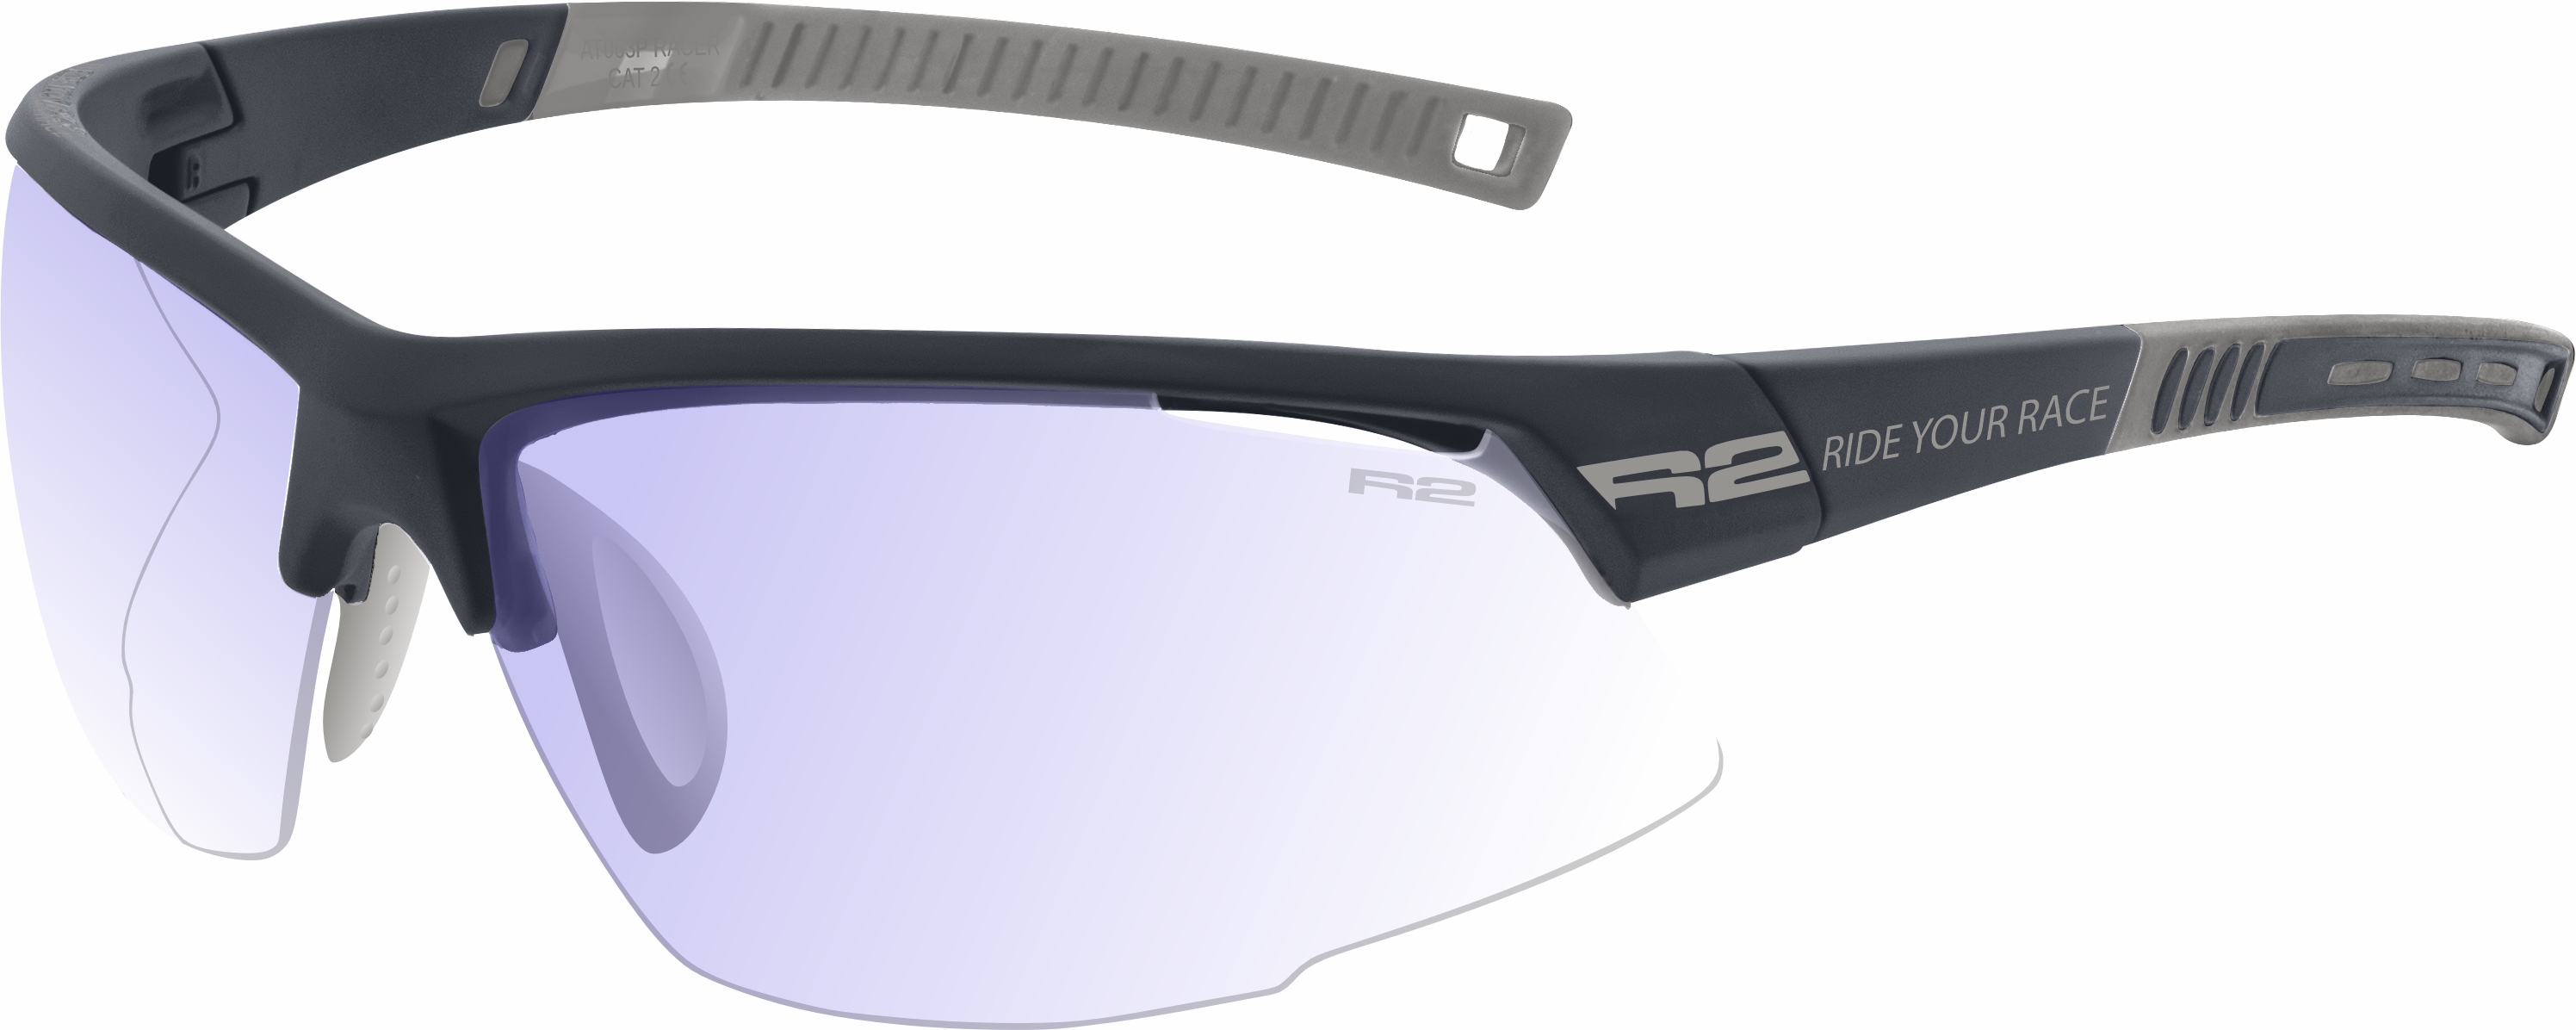 Photochromatic sunglasses R2 RACER AT063A13 standard